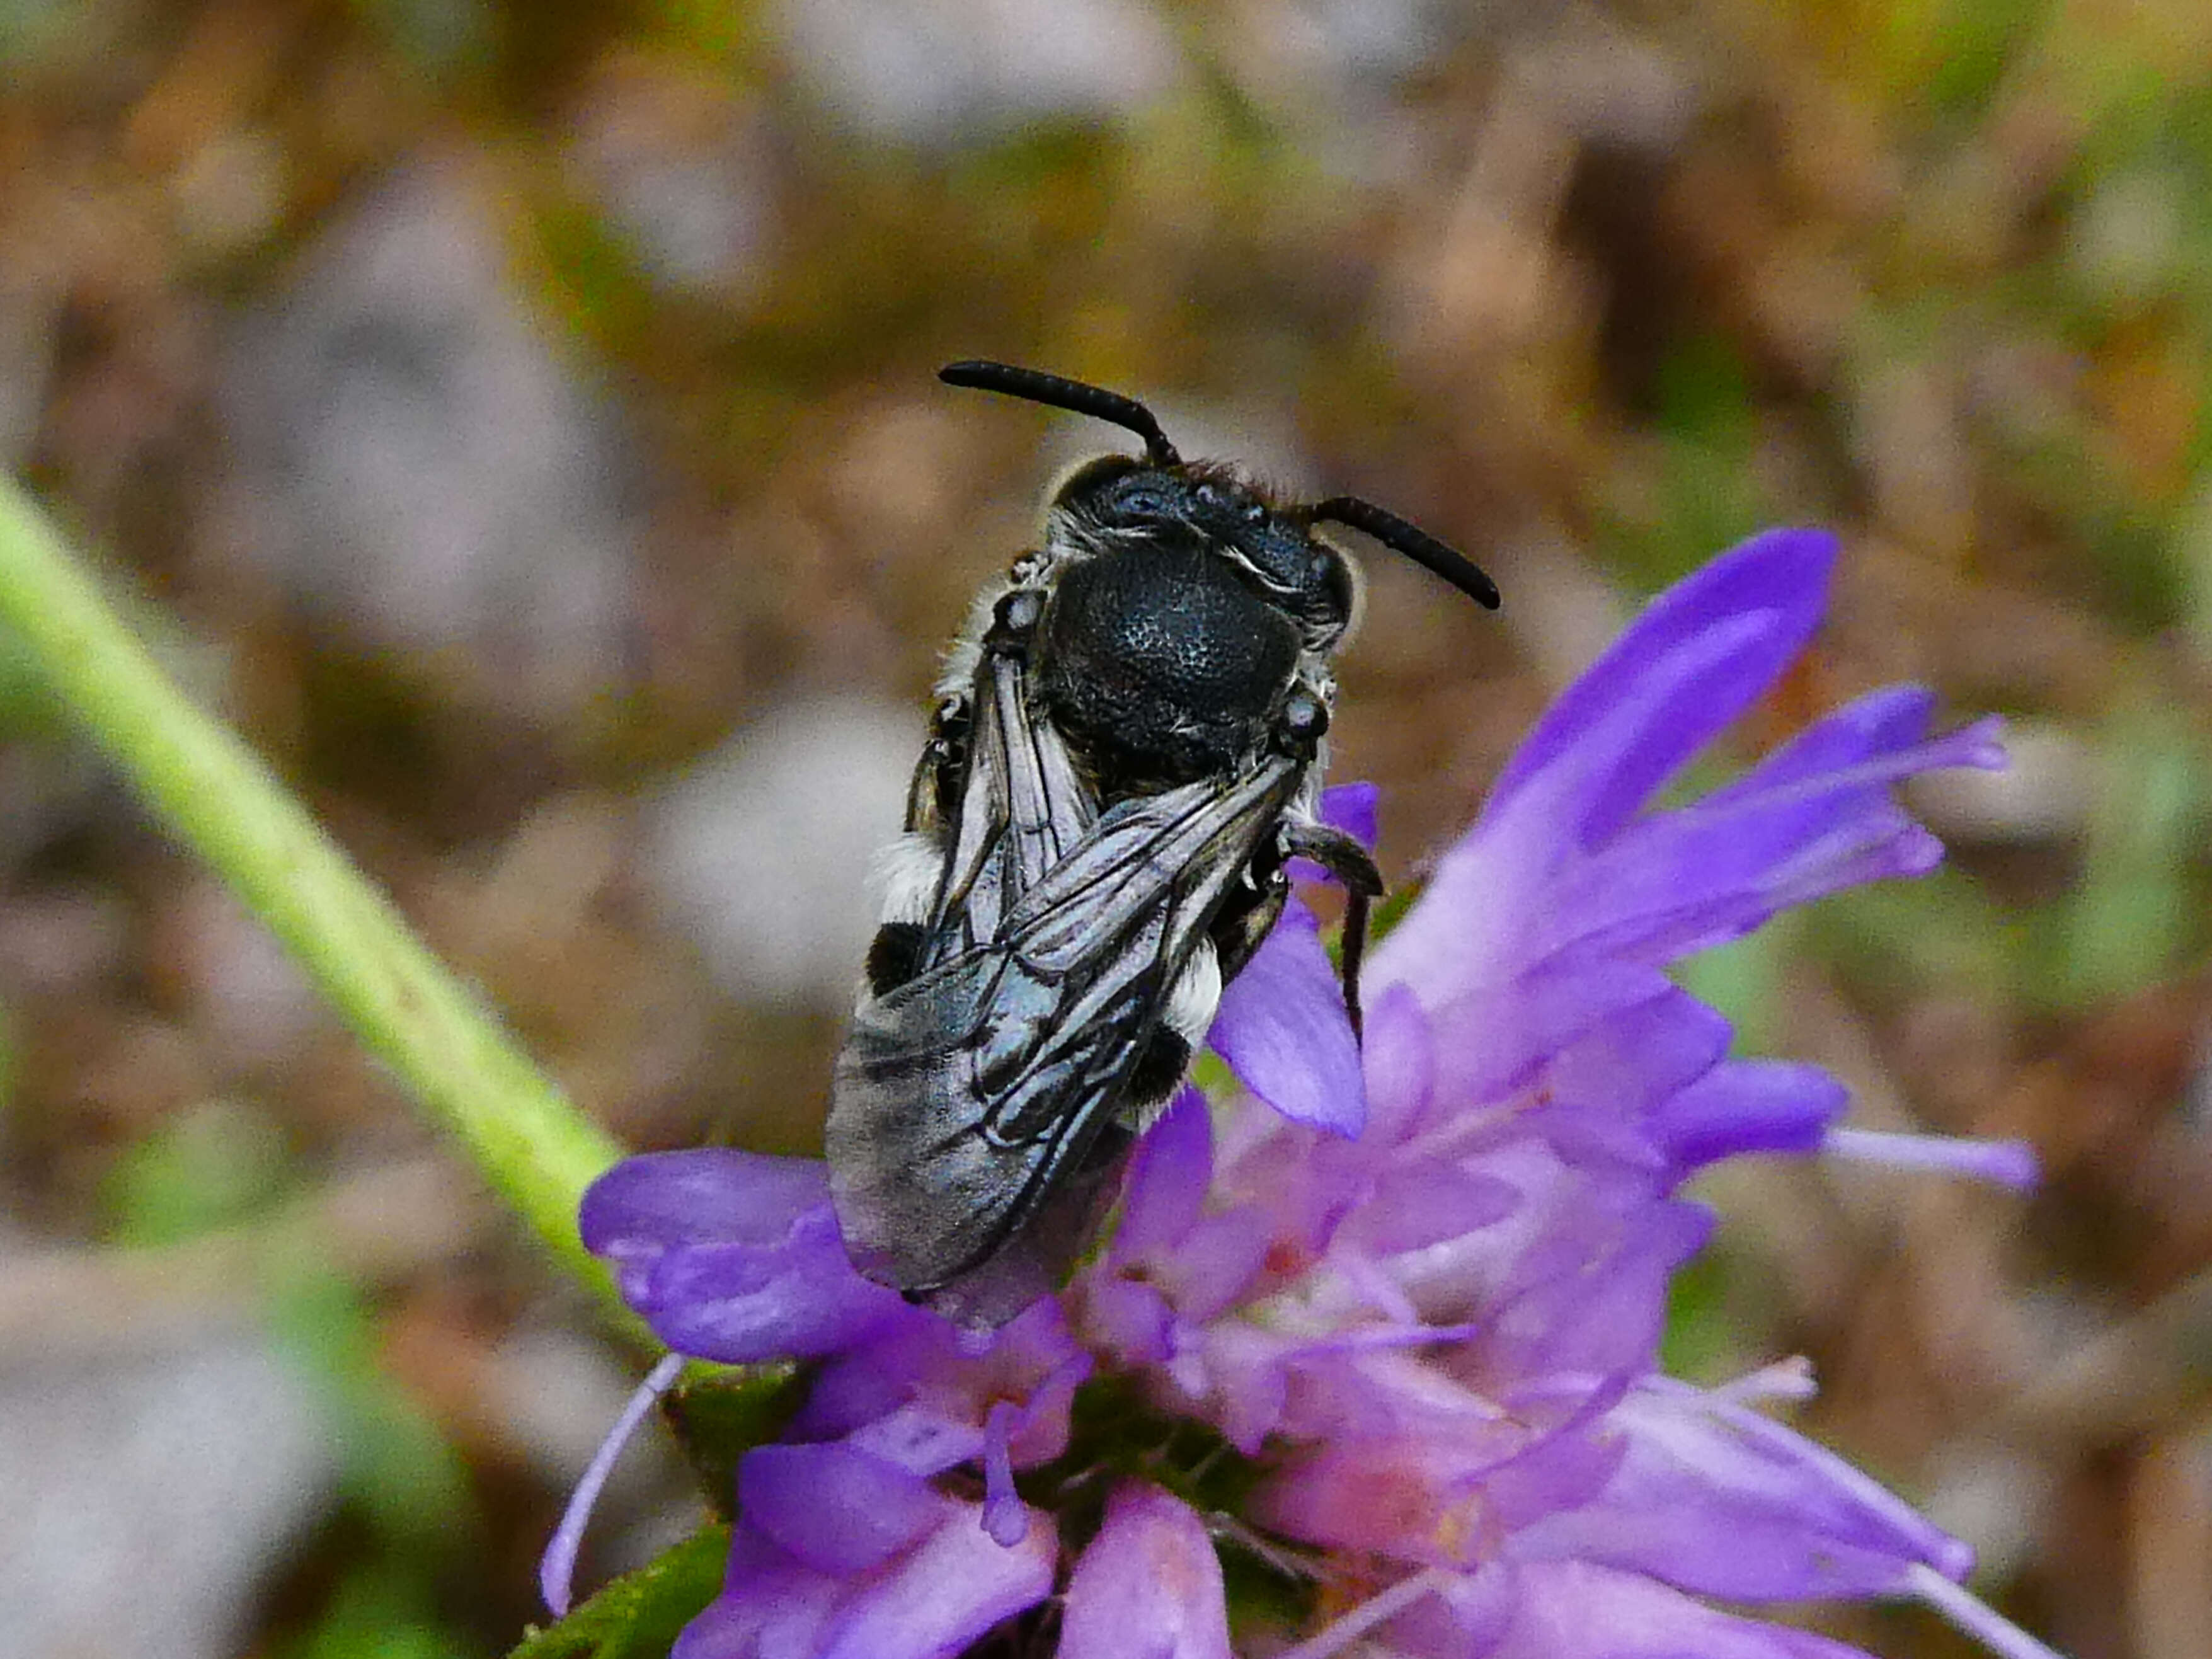 Image of Cuckoo-leaf-cutter Bees